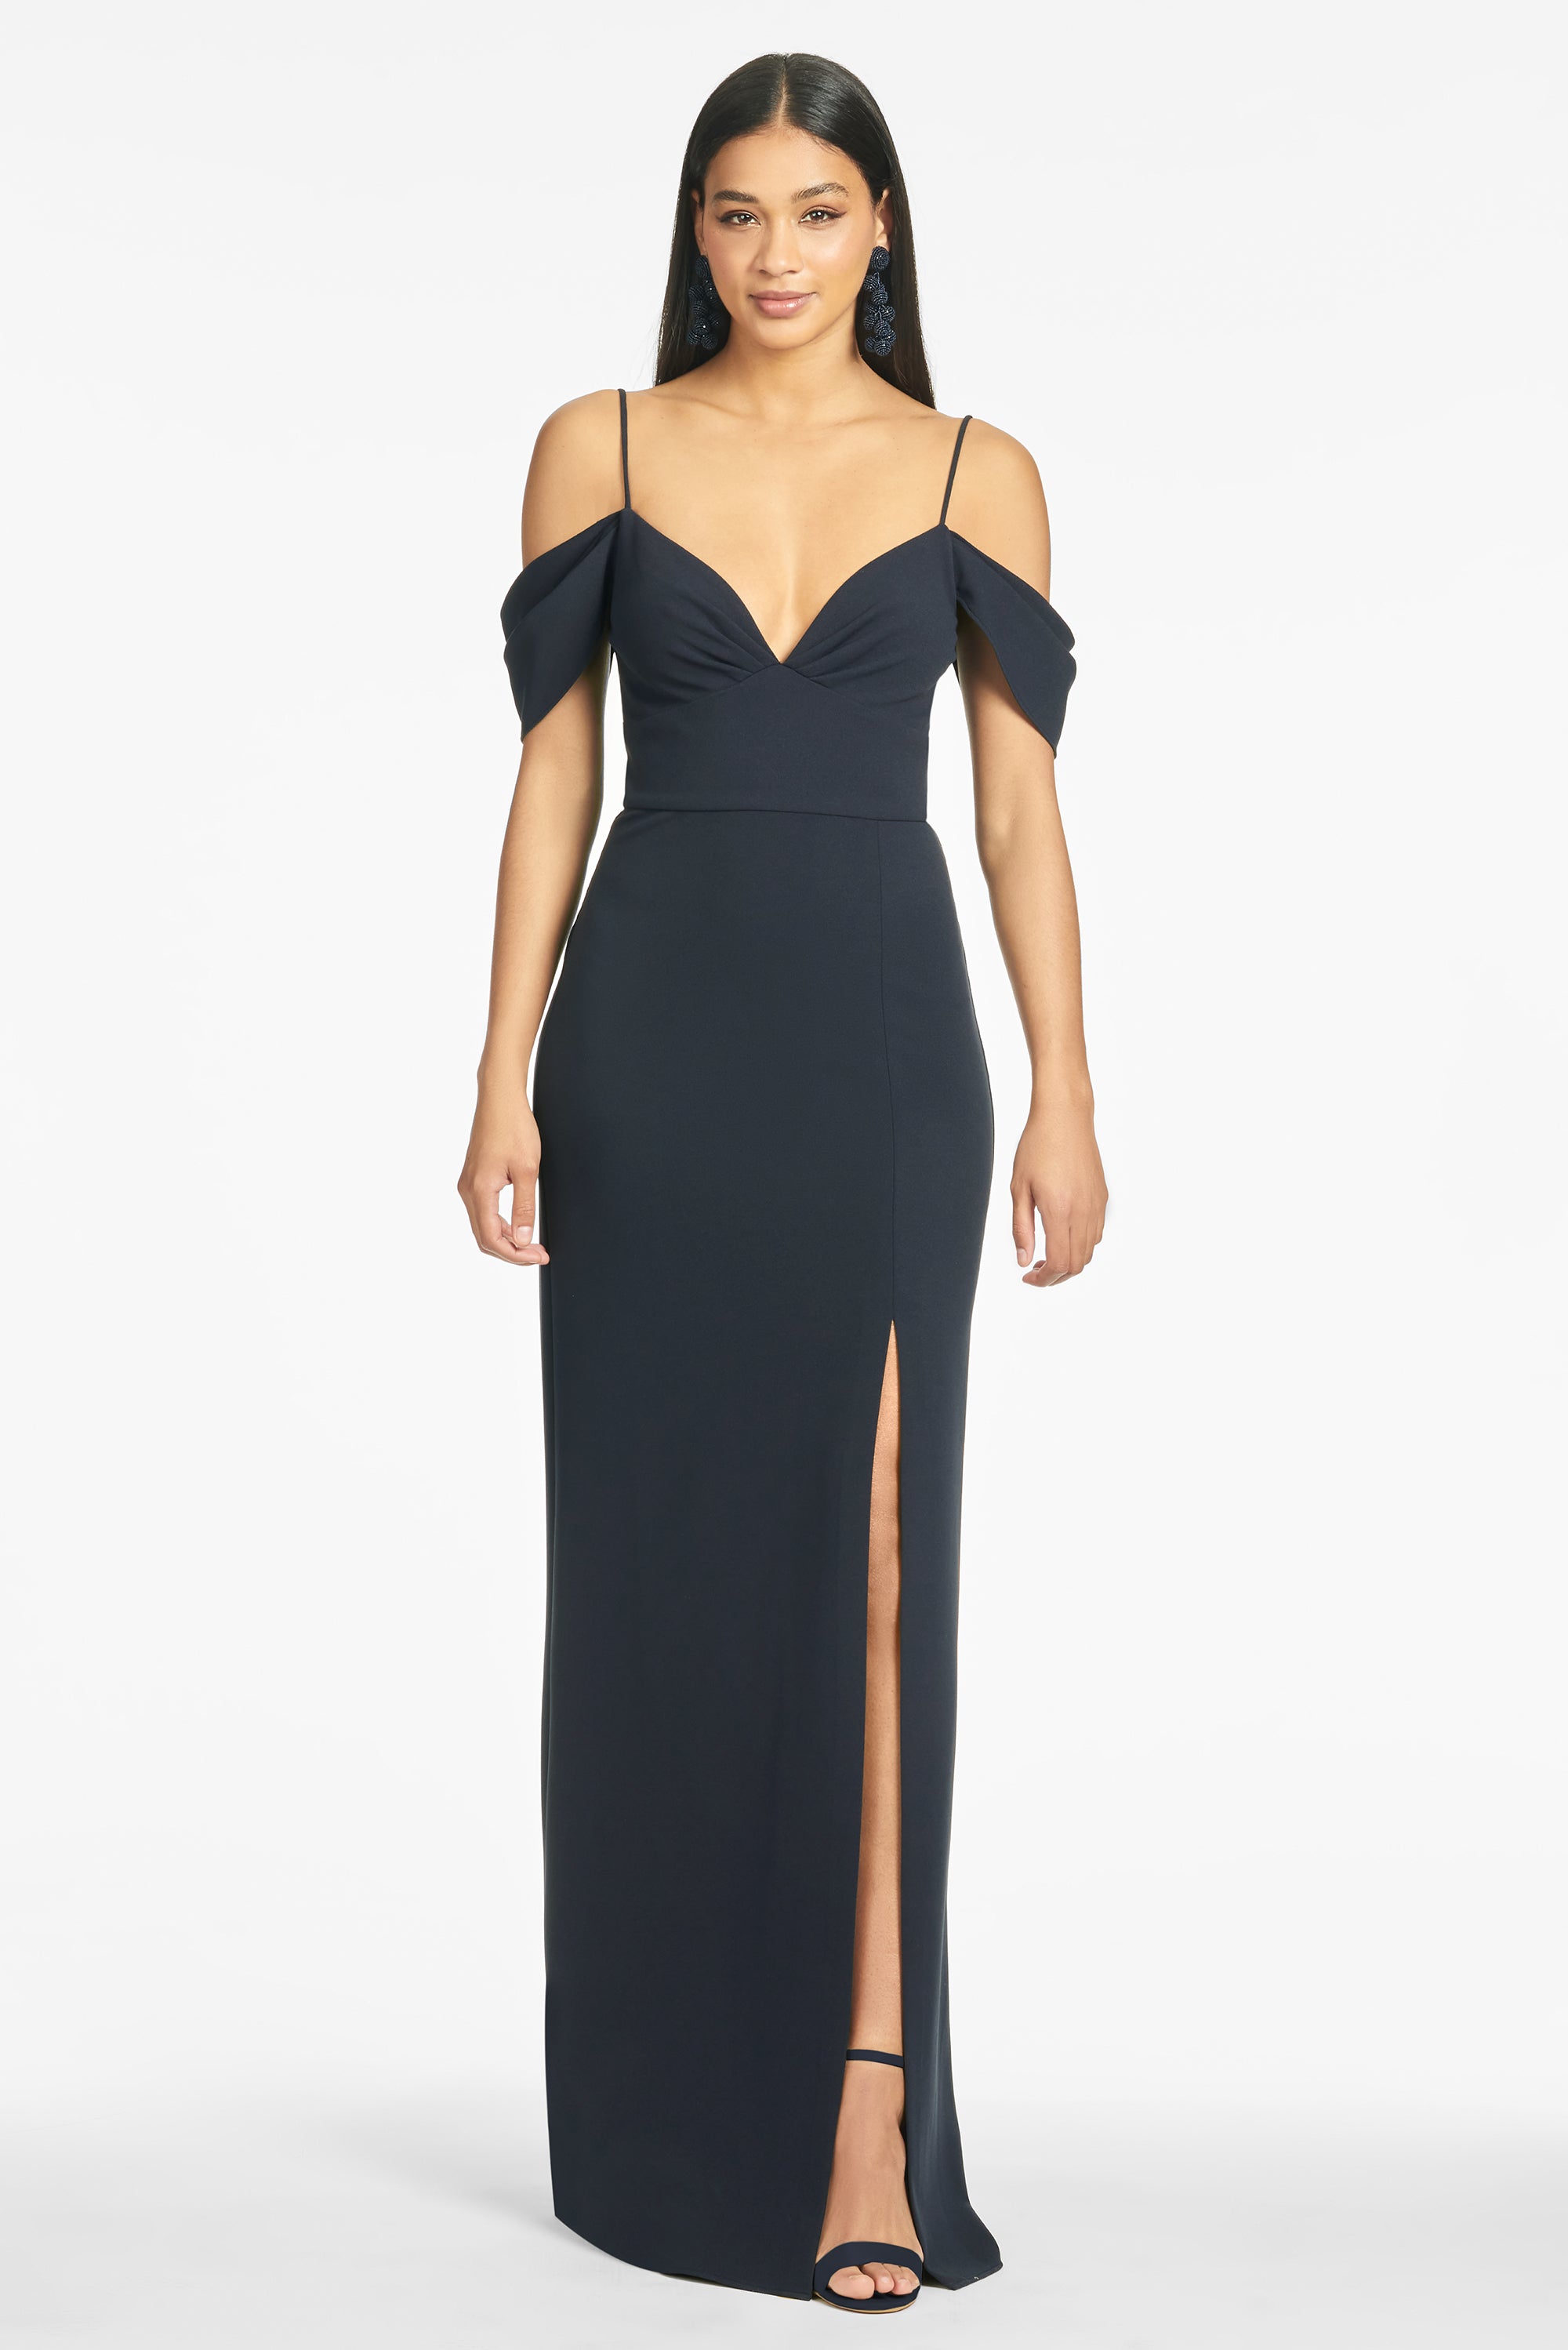 Brittany 4-Way Stretch Crepe Gown in Navy - Sachin & Babi